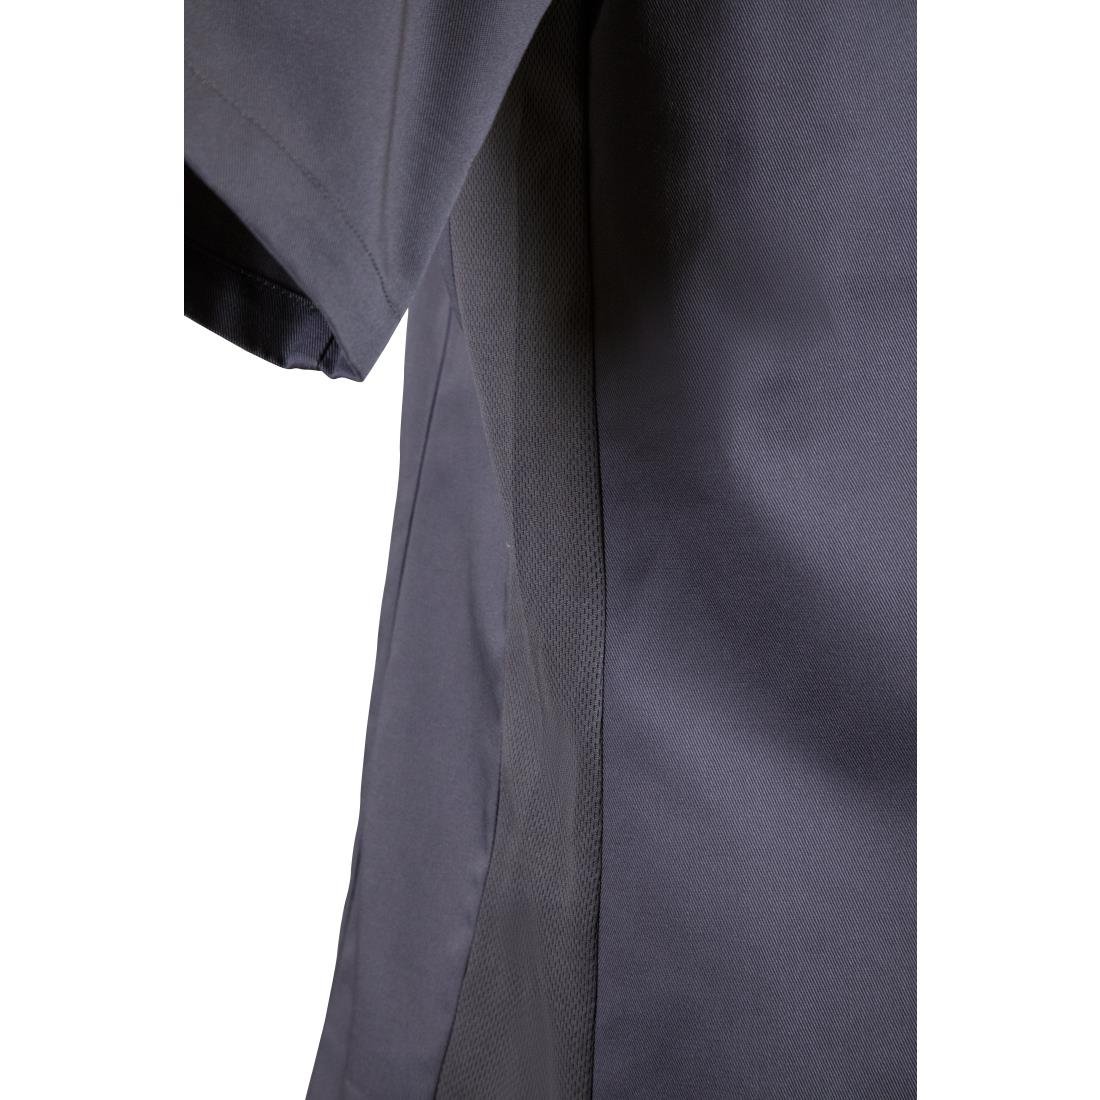 BB712-M Southside Band Collar Chefs Jacket Charcoal Size M JD Catering Equipment Solutions Ltd